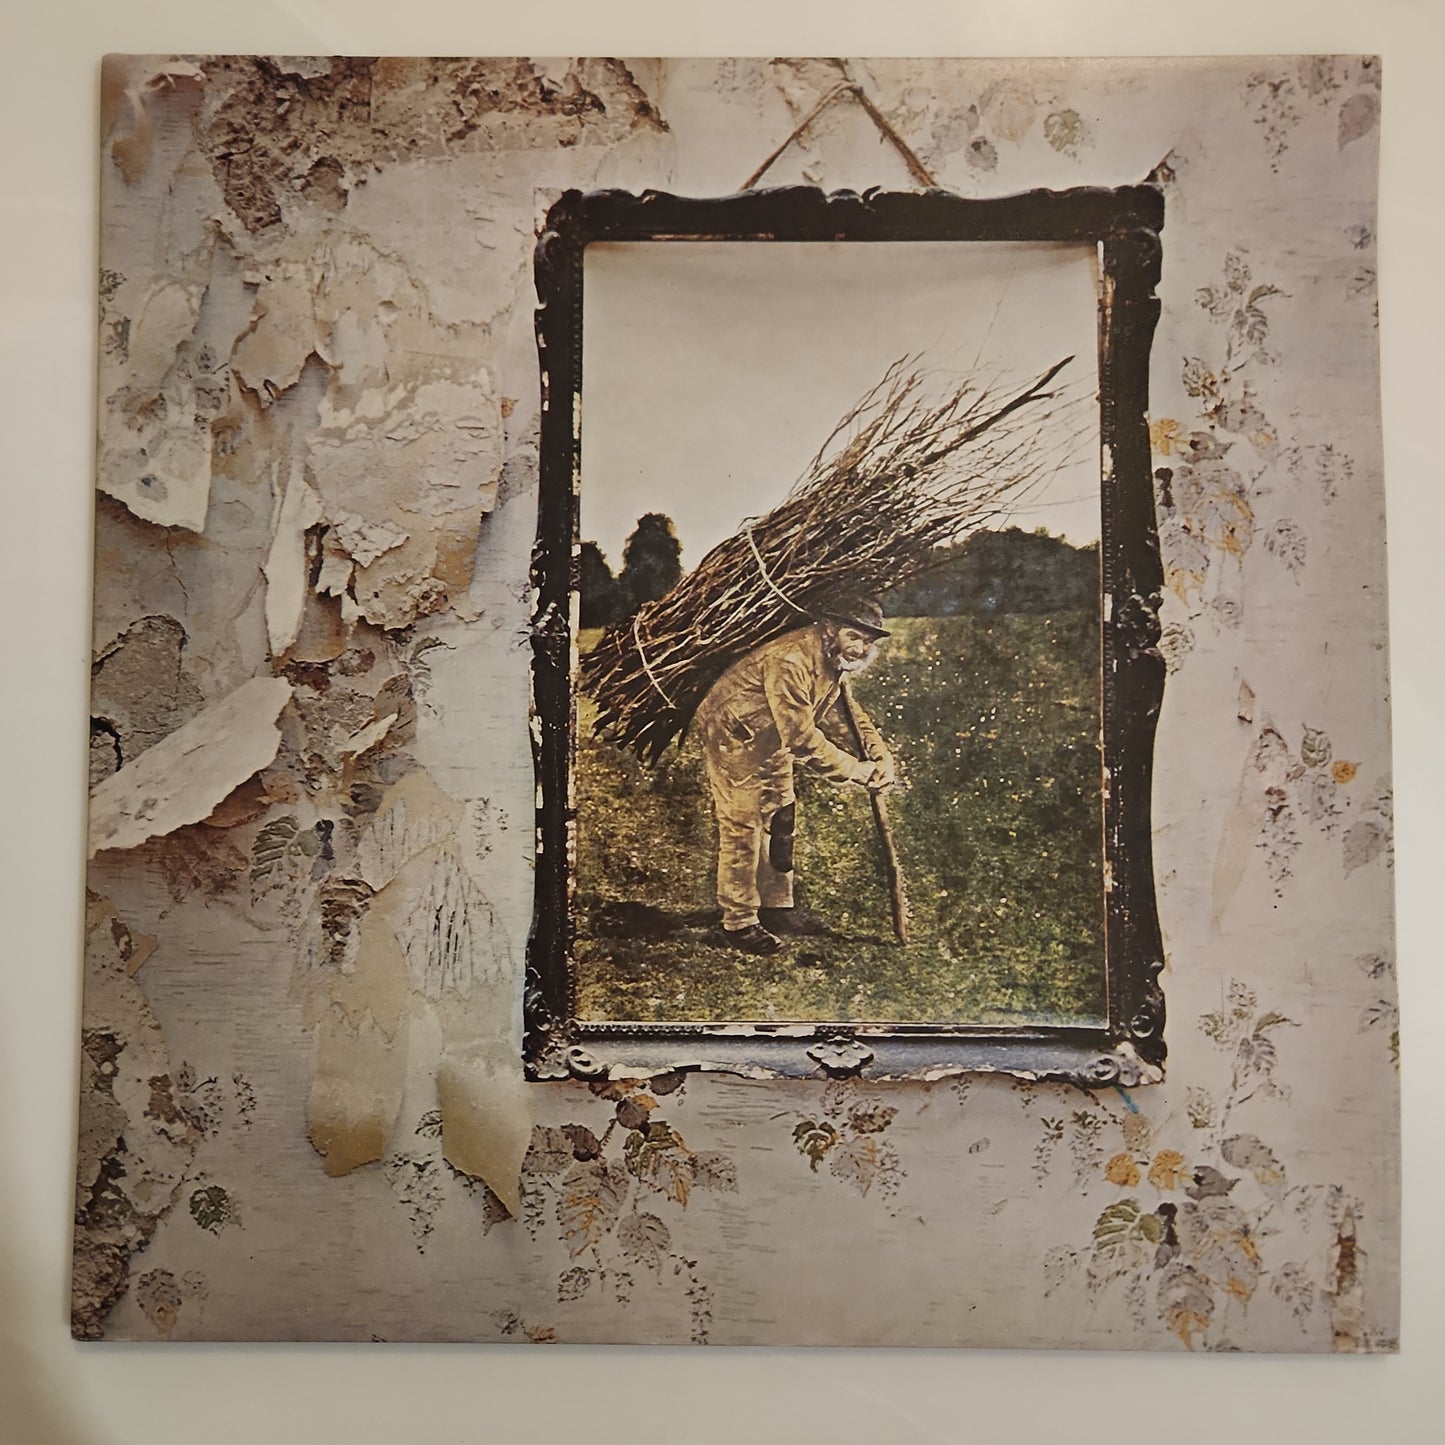 Led Zeppelin - IV Untitled (A63)